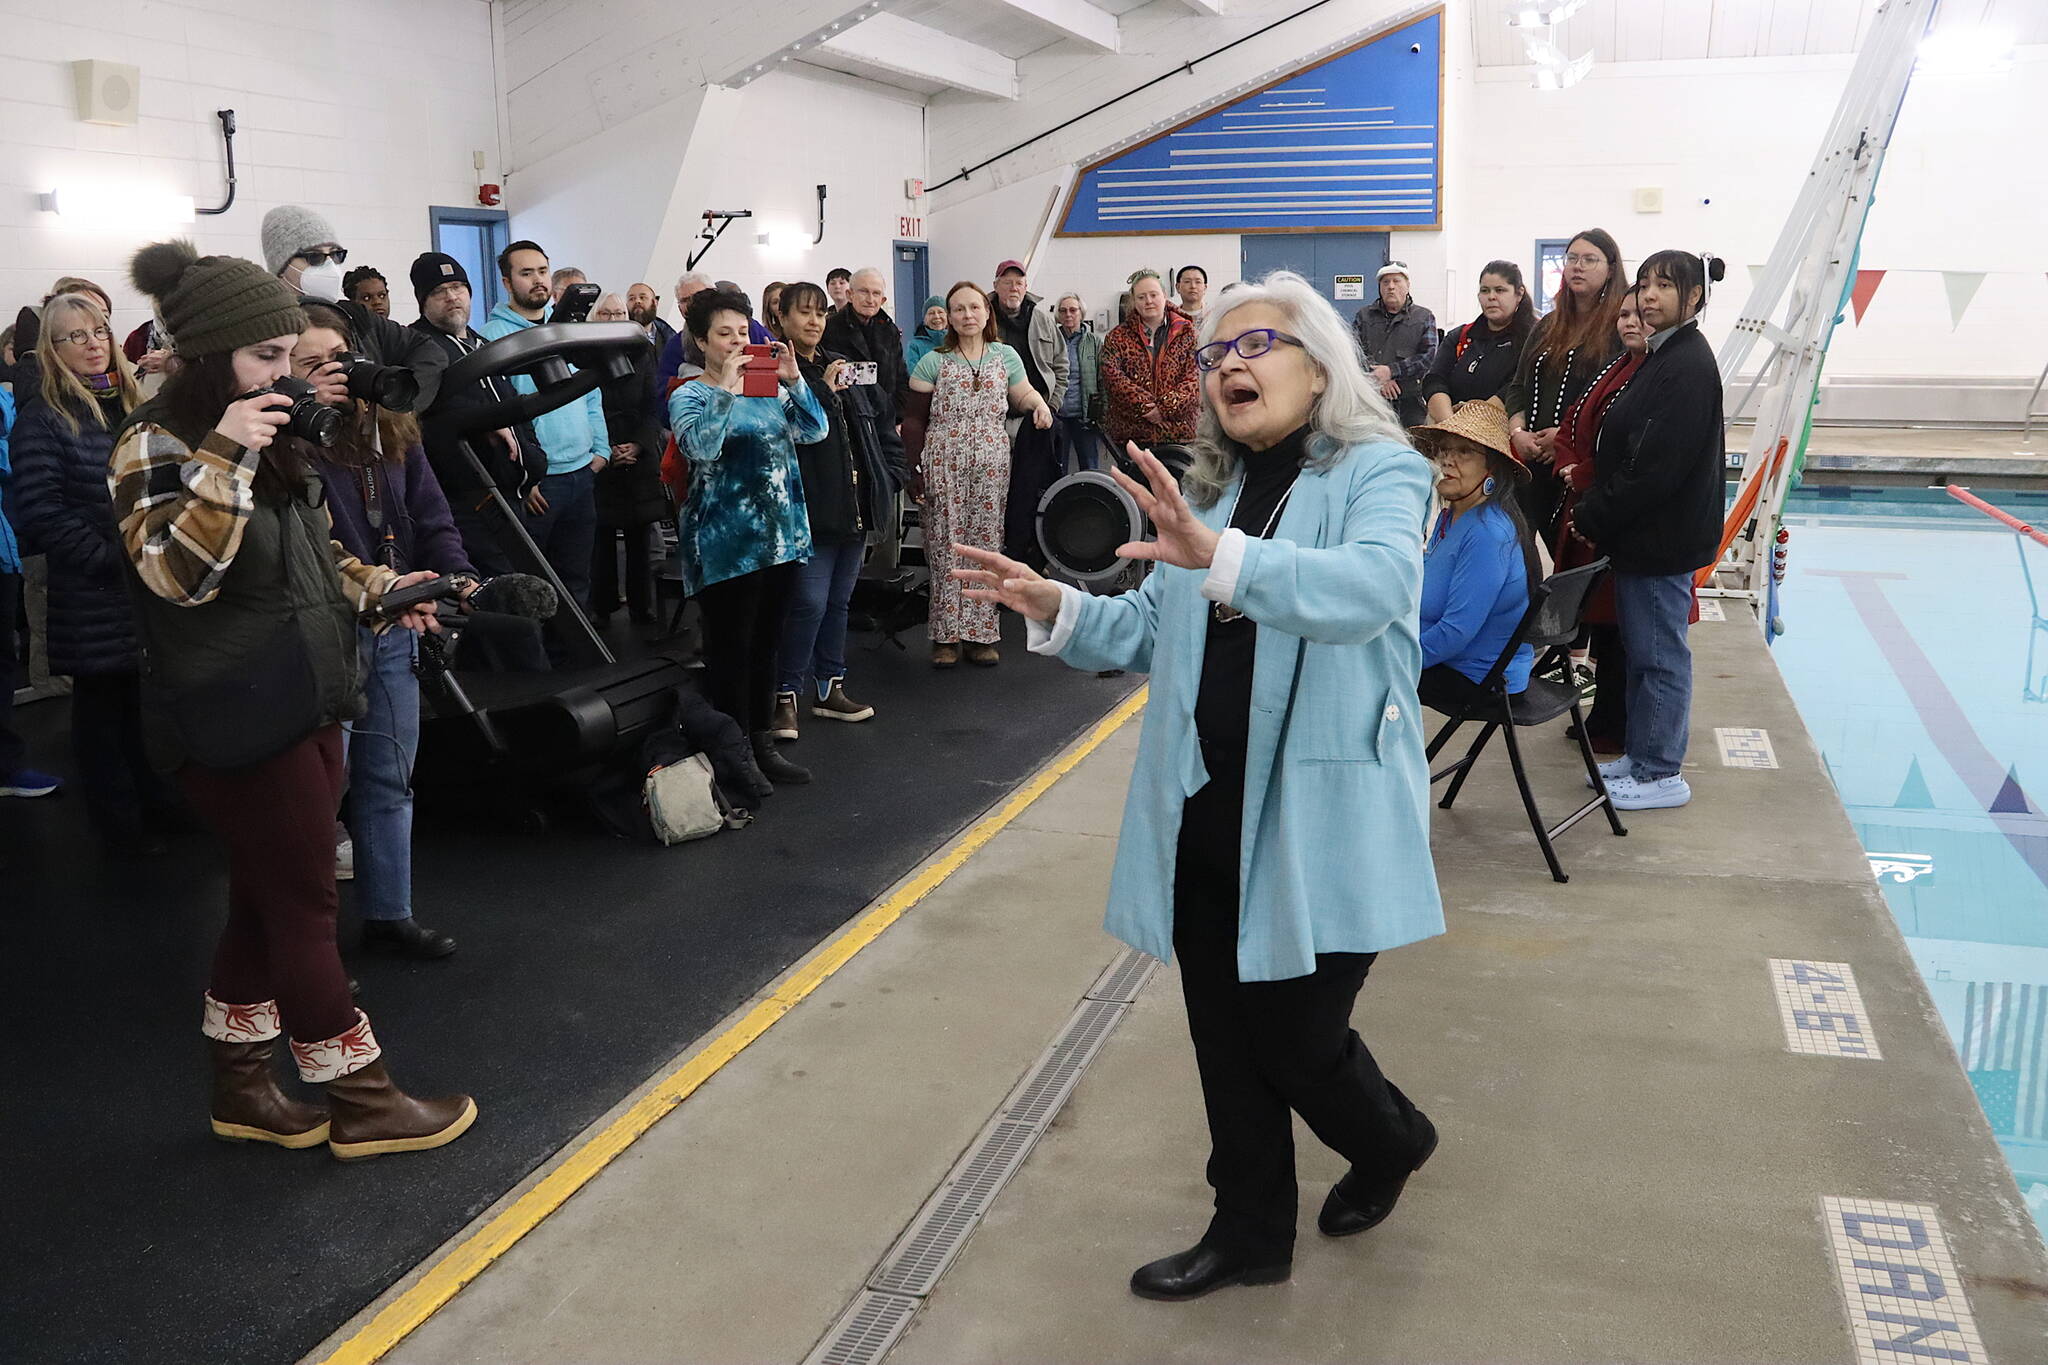 Liana Wallace offers a water blessing during a ribbon-cutting ceremony for the Augustus G. Brown Swimming Pool on Friday following nearly a year of renovations. The pool is scheduled to reopen for public use on Tuesday. (Mark Sabbatini / Juneau Empire)